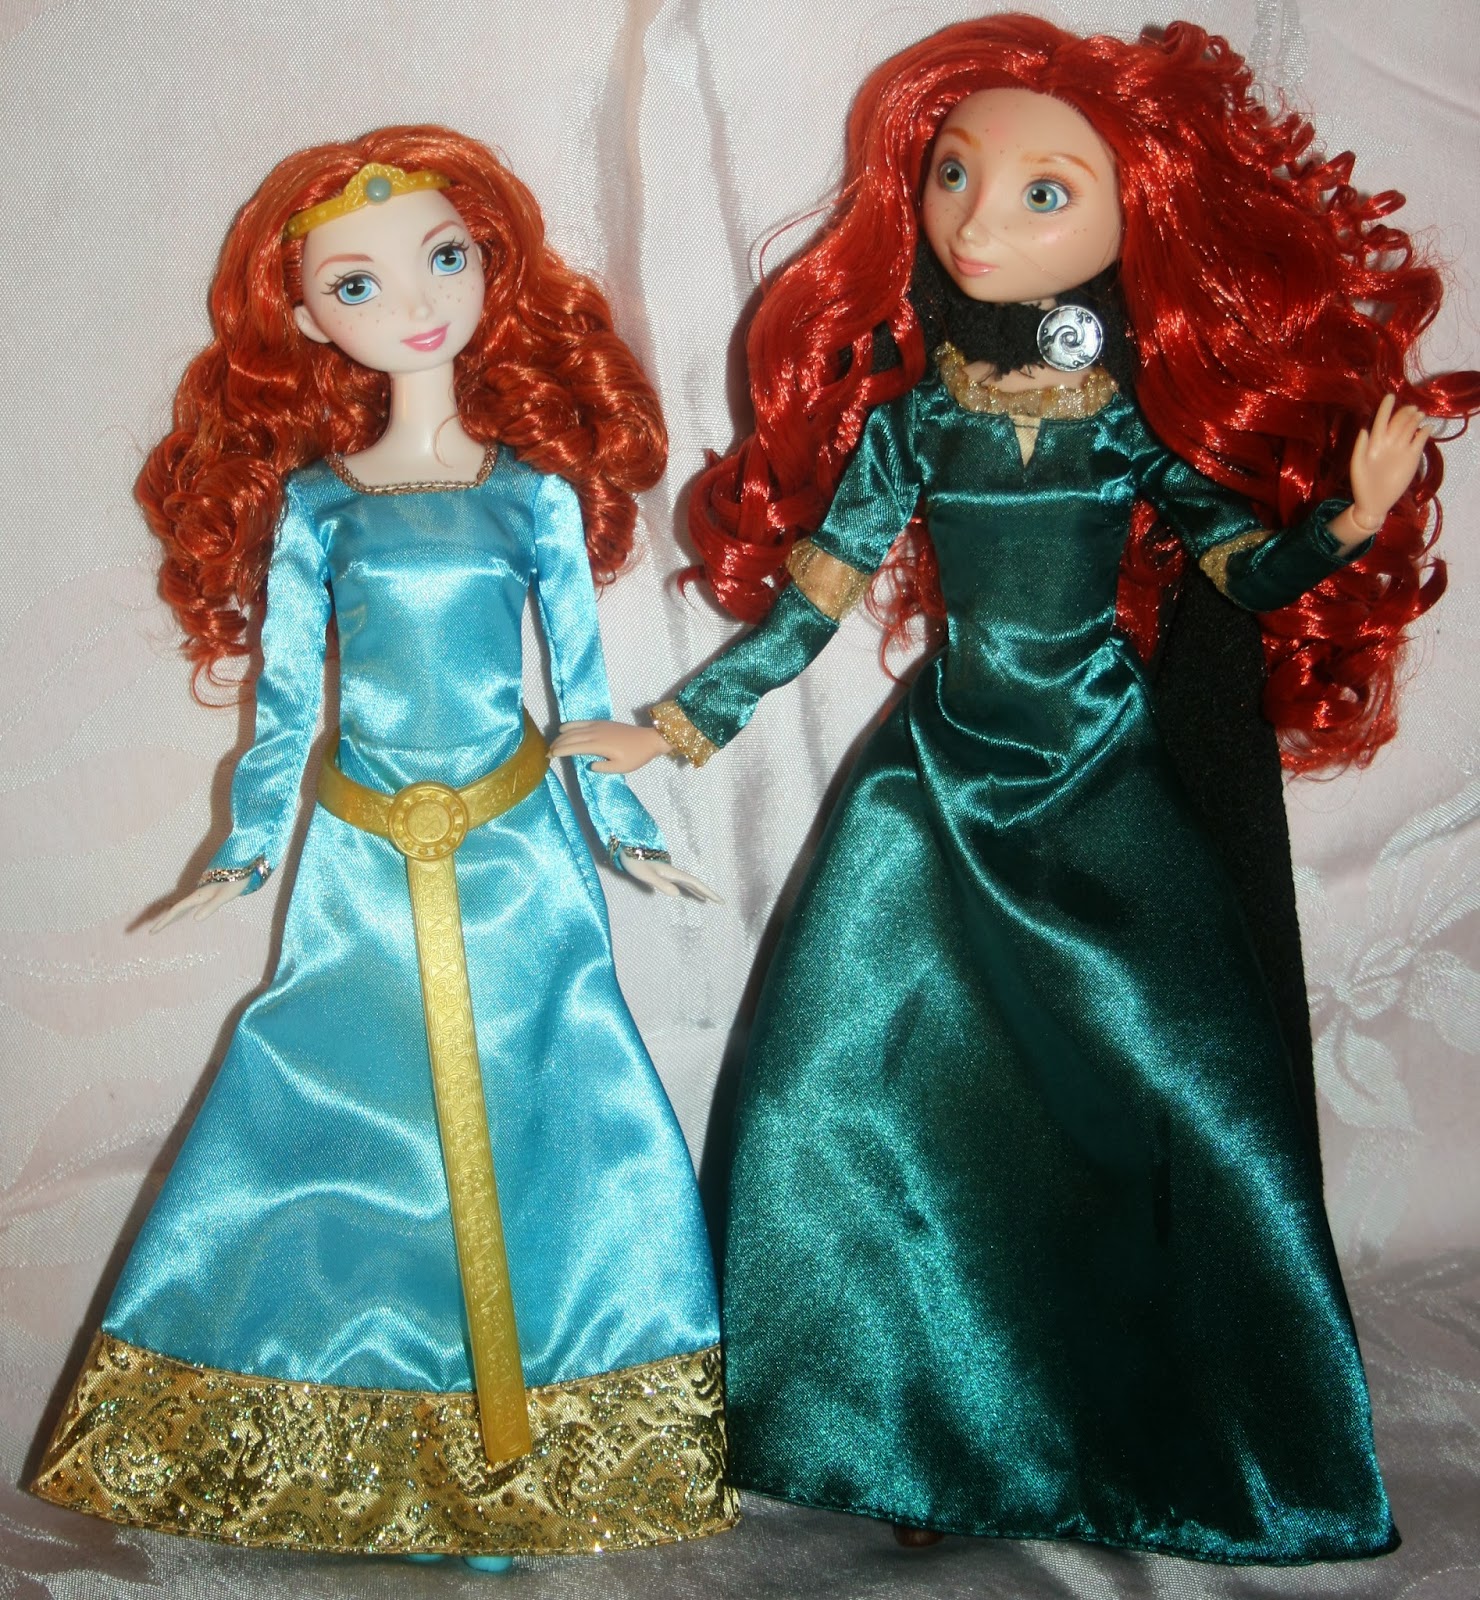 PLANET OF THE DOLLS: Play line Disney Store Brave Merida doll review